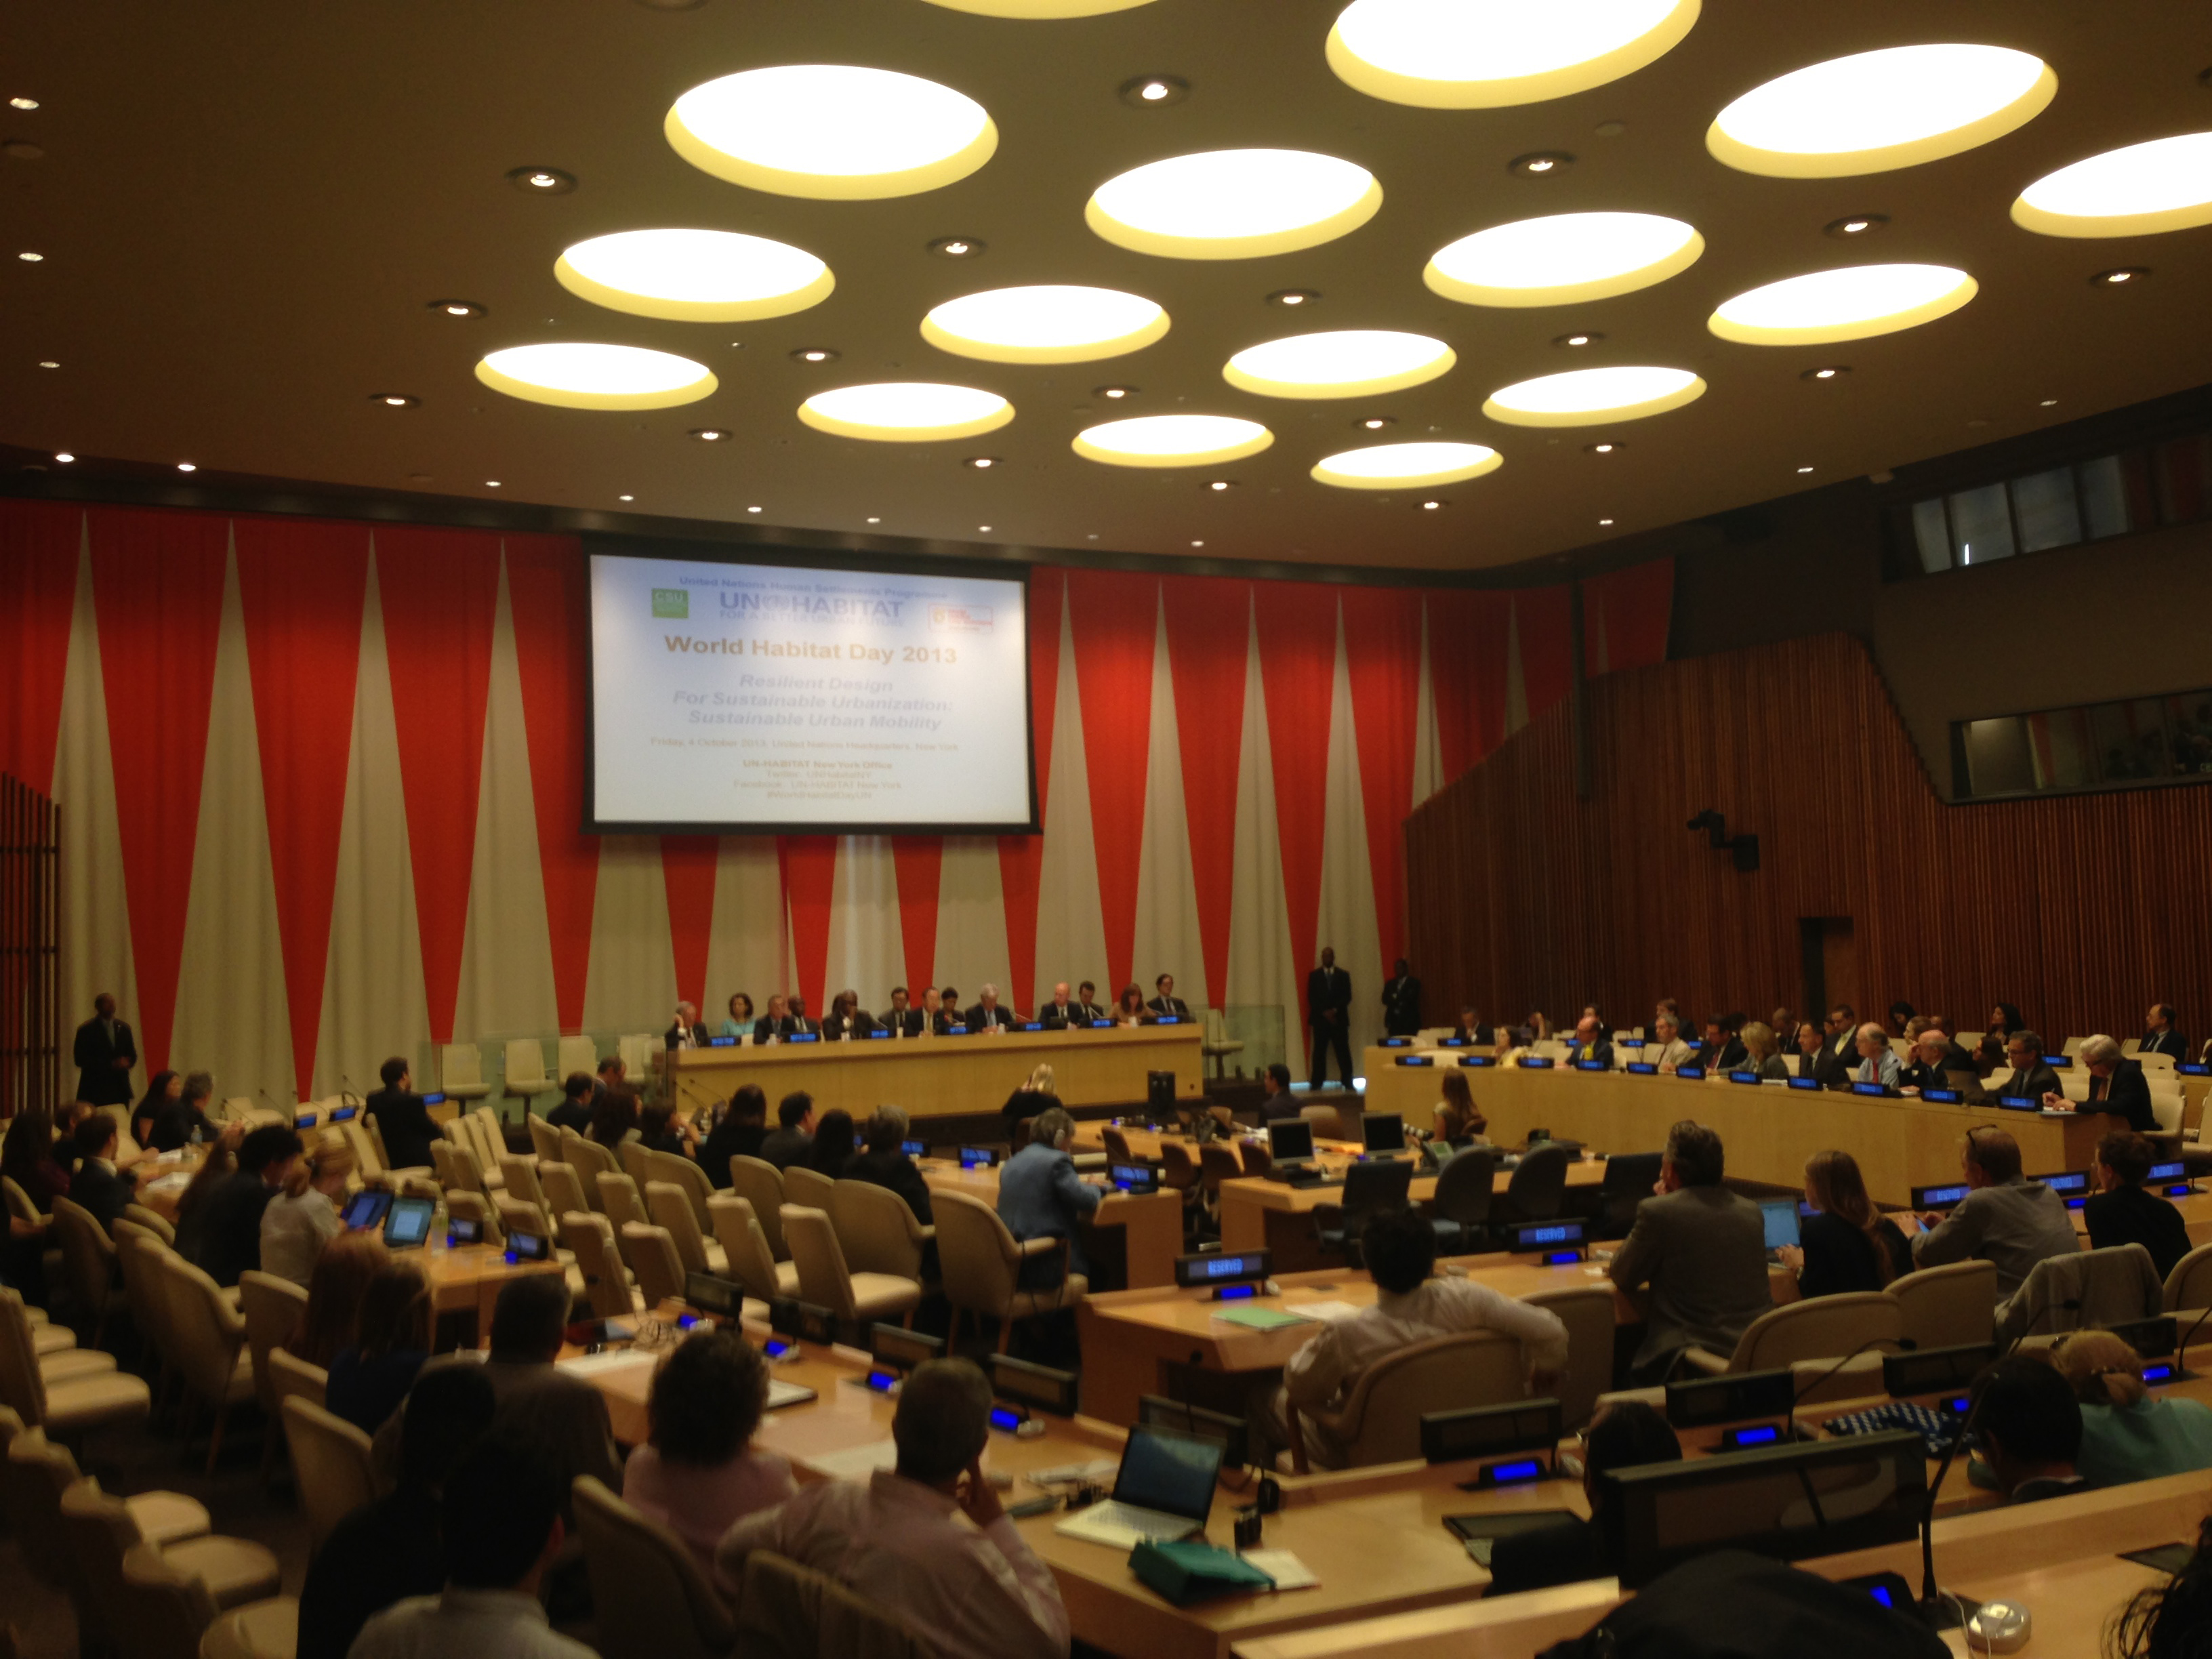 UN-Habitat Symposium Considers the Elements of Resilience